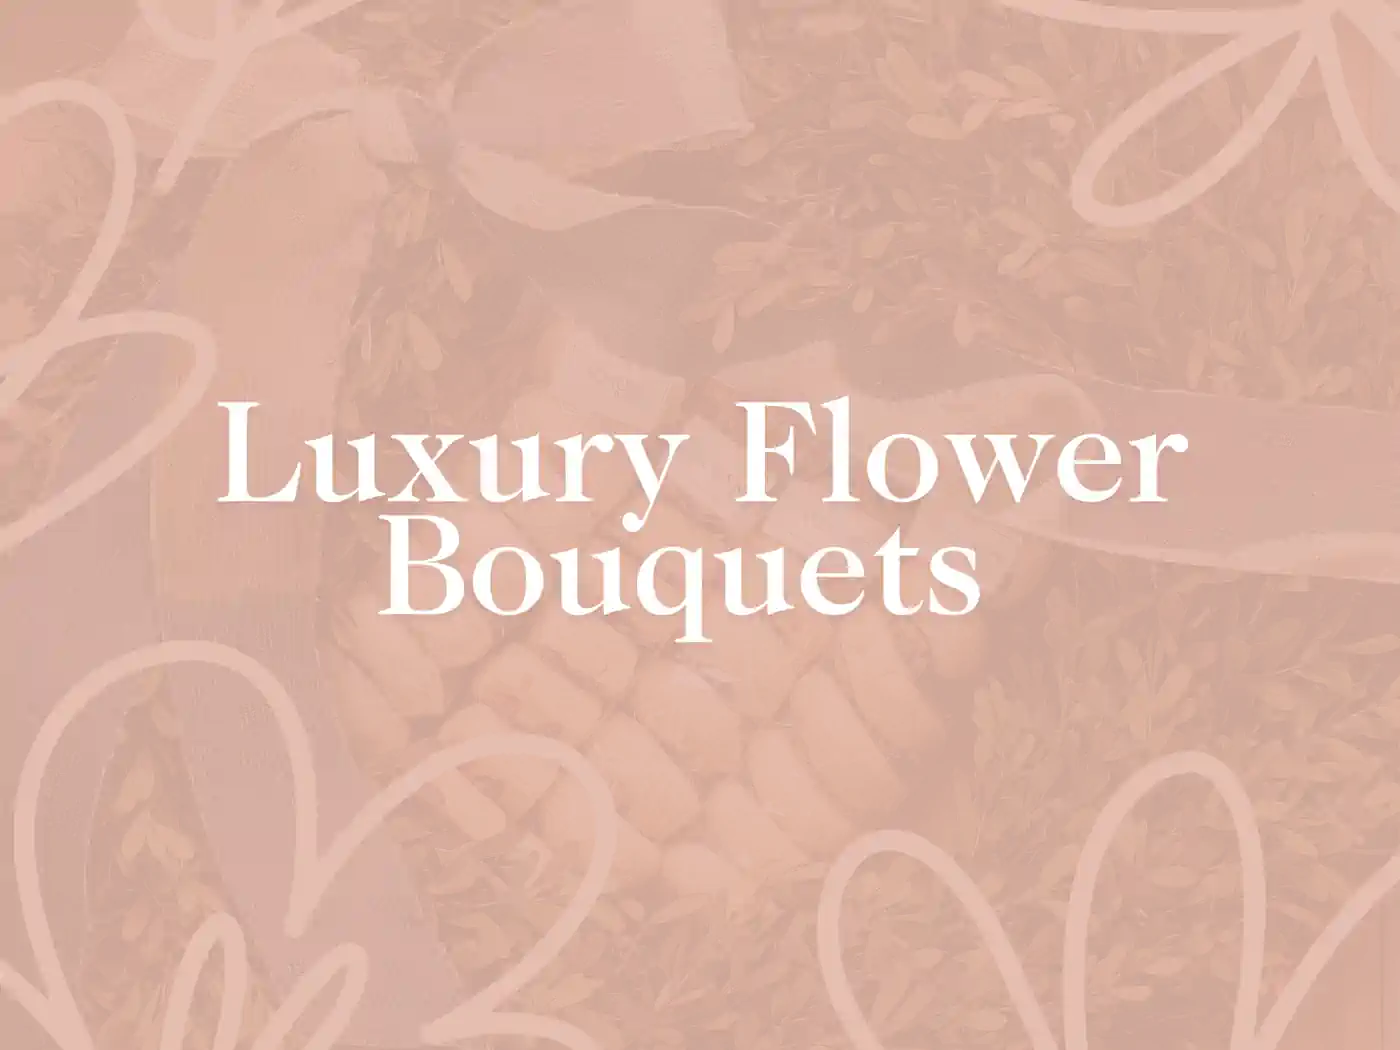 Image of a beautifully designed card with the text "Luxury Flower Bouquets" against a background of flowers. Fabulous Flowers and Gifts - Luxury Flower Bouquets.